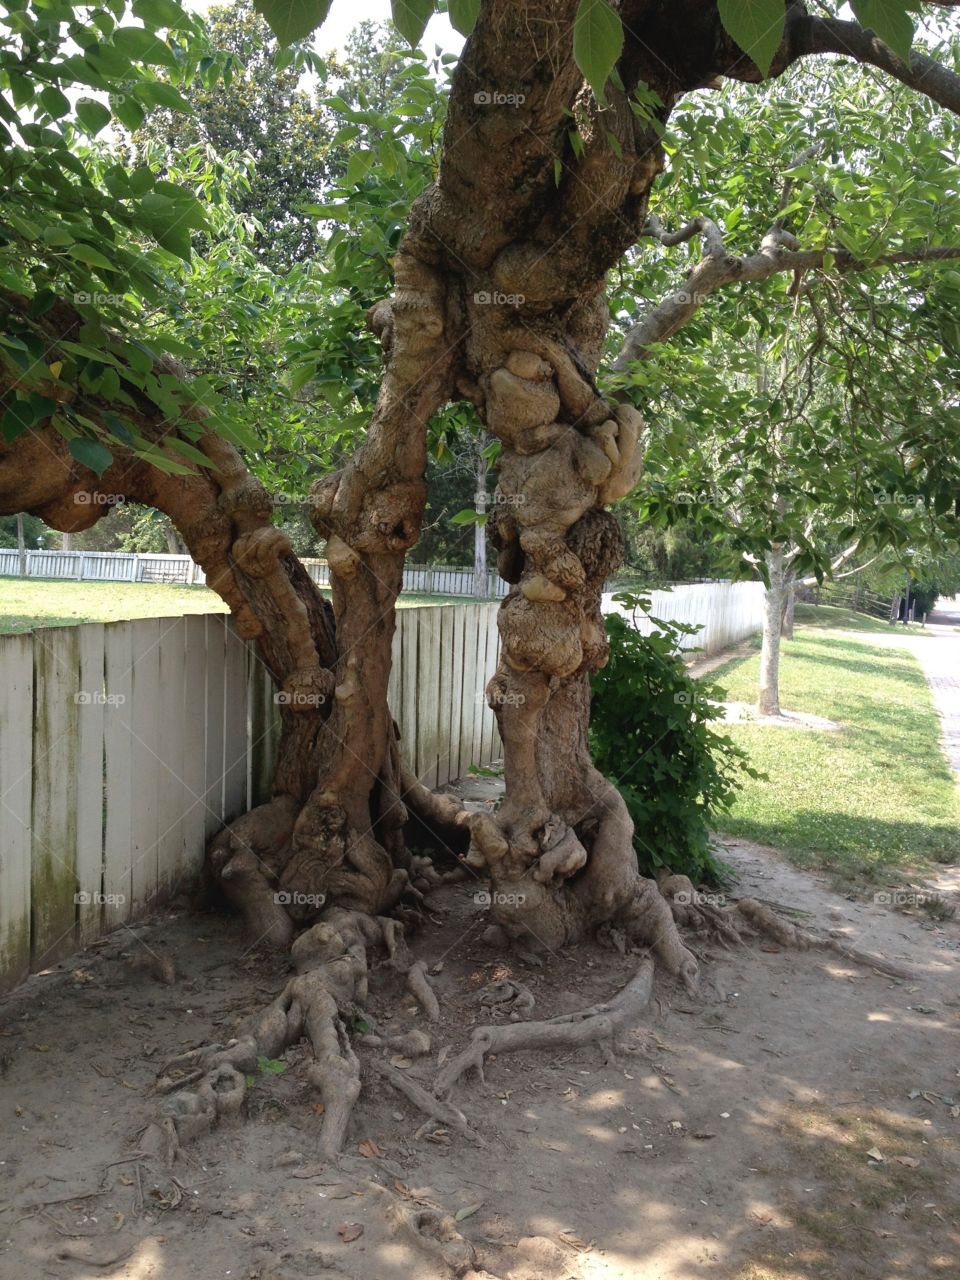 Gnarly tree. Gnarled tree in Colonial Williamsburg.